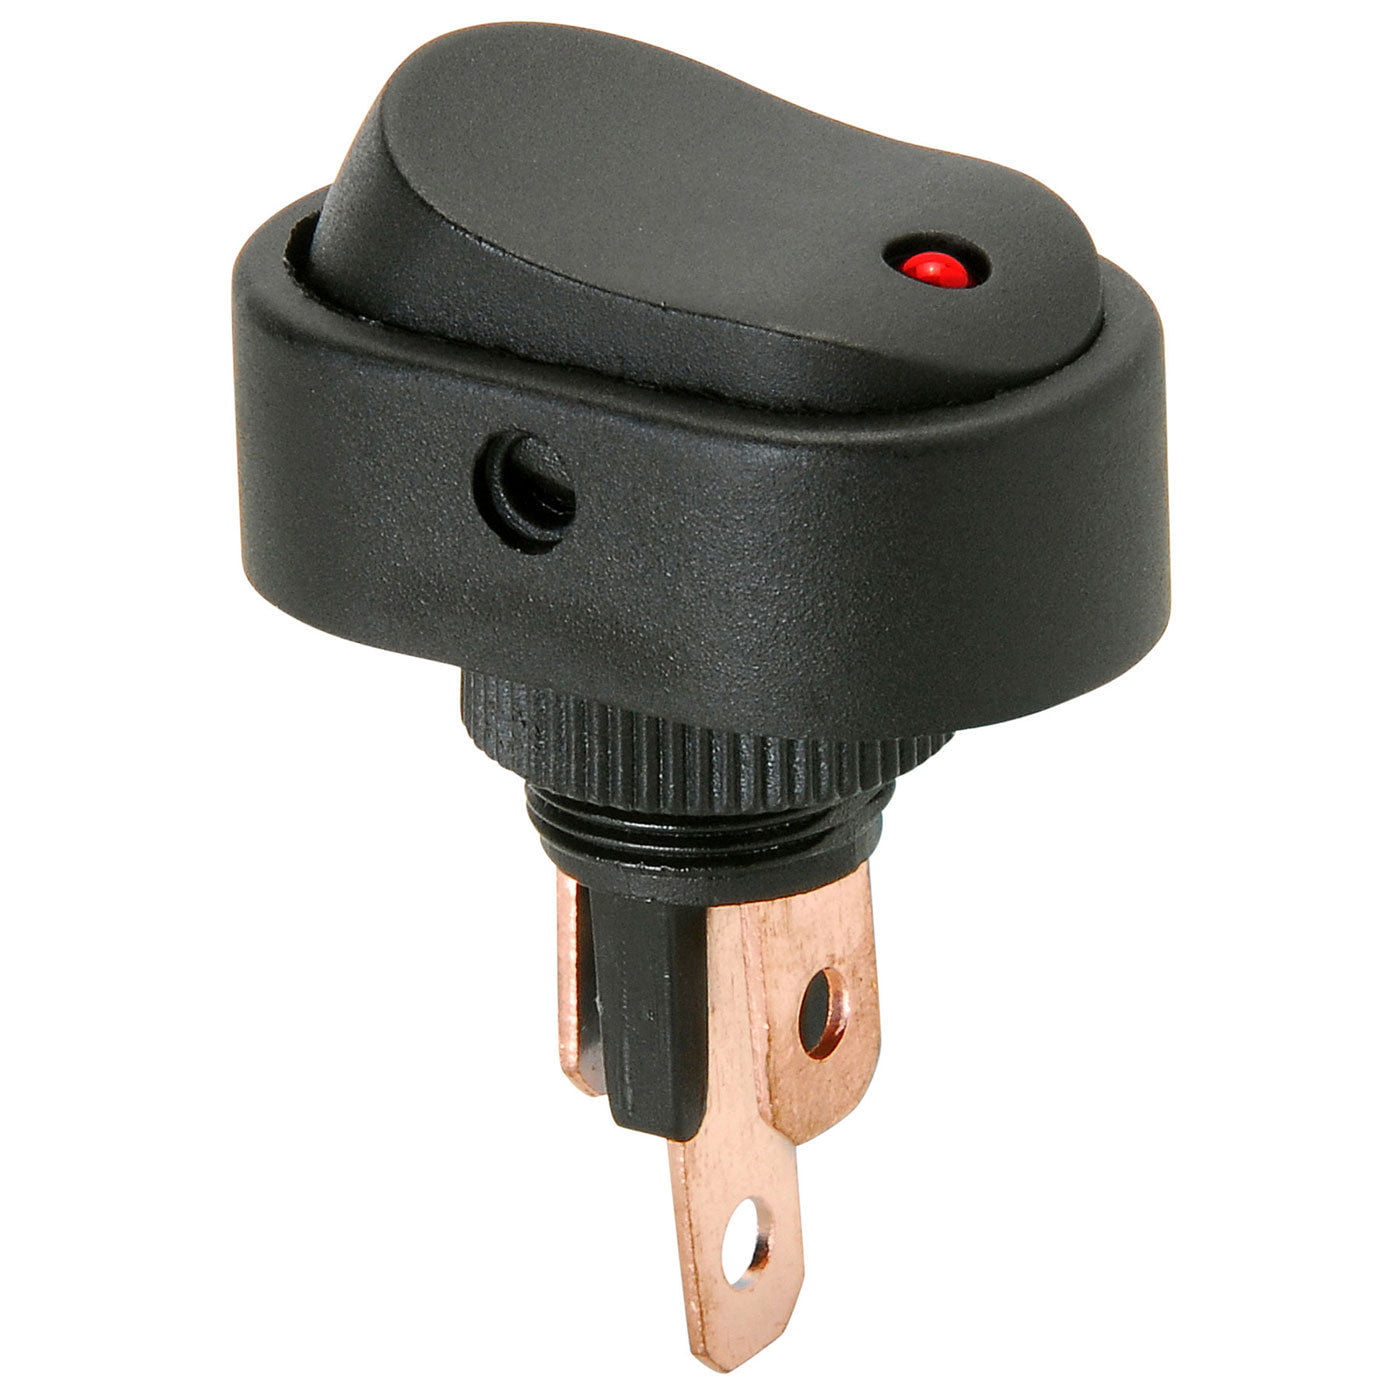 Paddle Switch 6 contacts Rocker Switch with Red Rocker Classic Switch